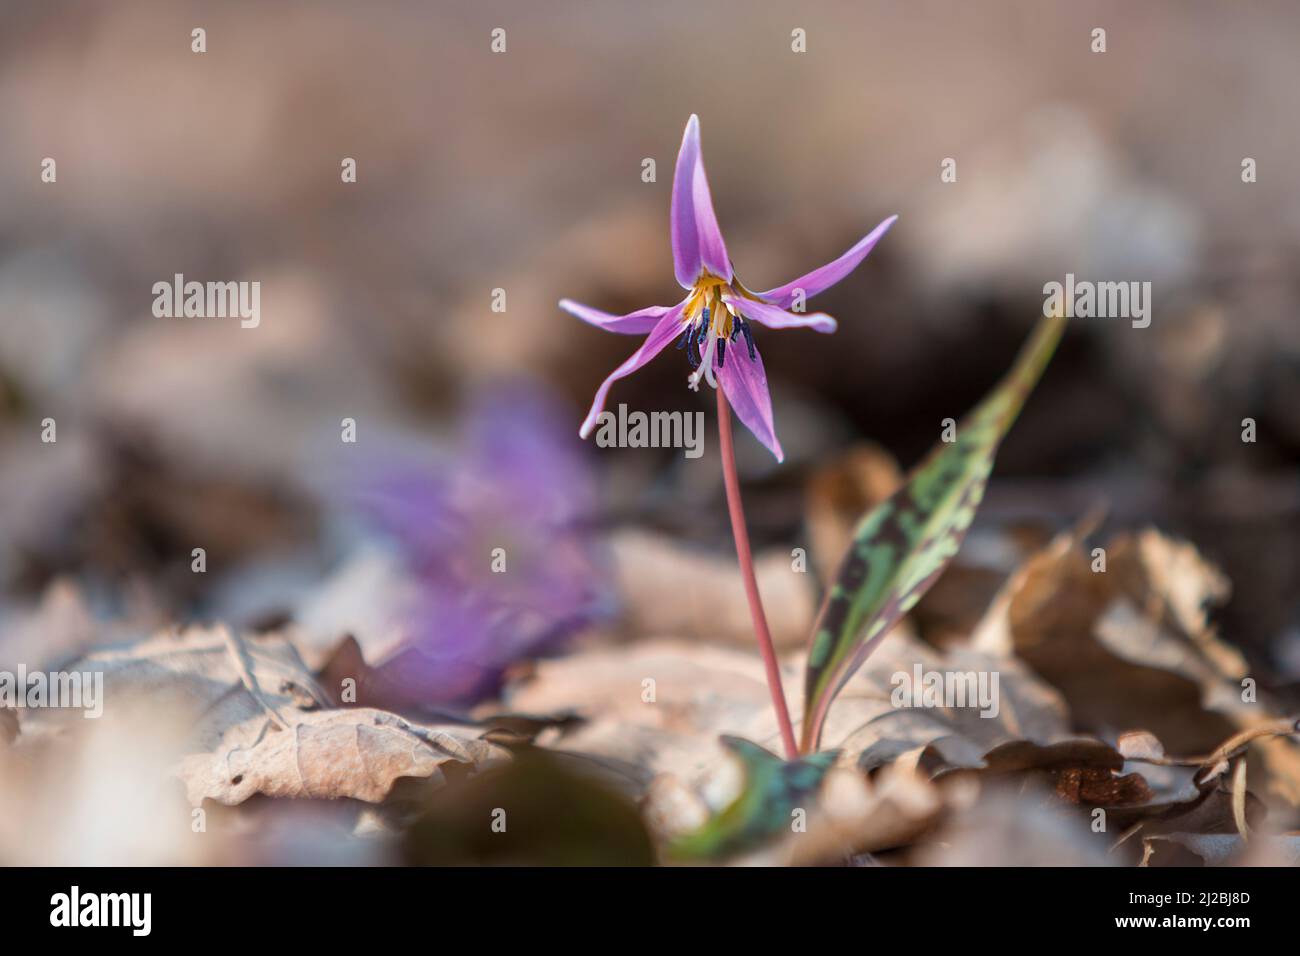 Erythronium dens-canis, Dog's tooth violet, early spring pink wildflower in the woods, blurred background Stock Photo